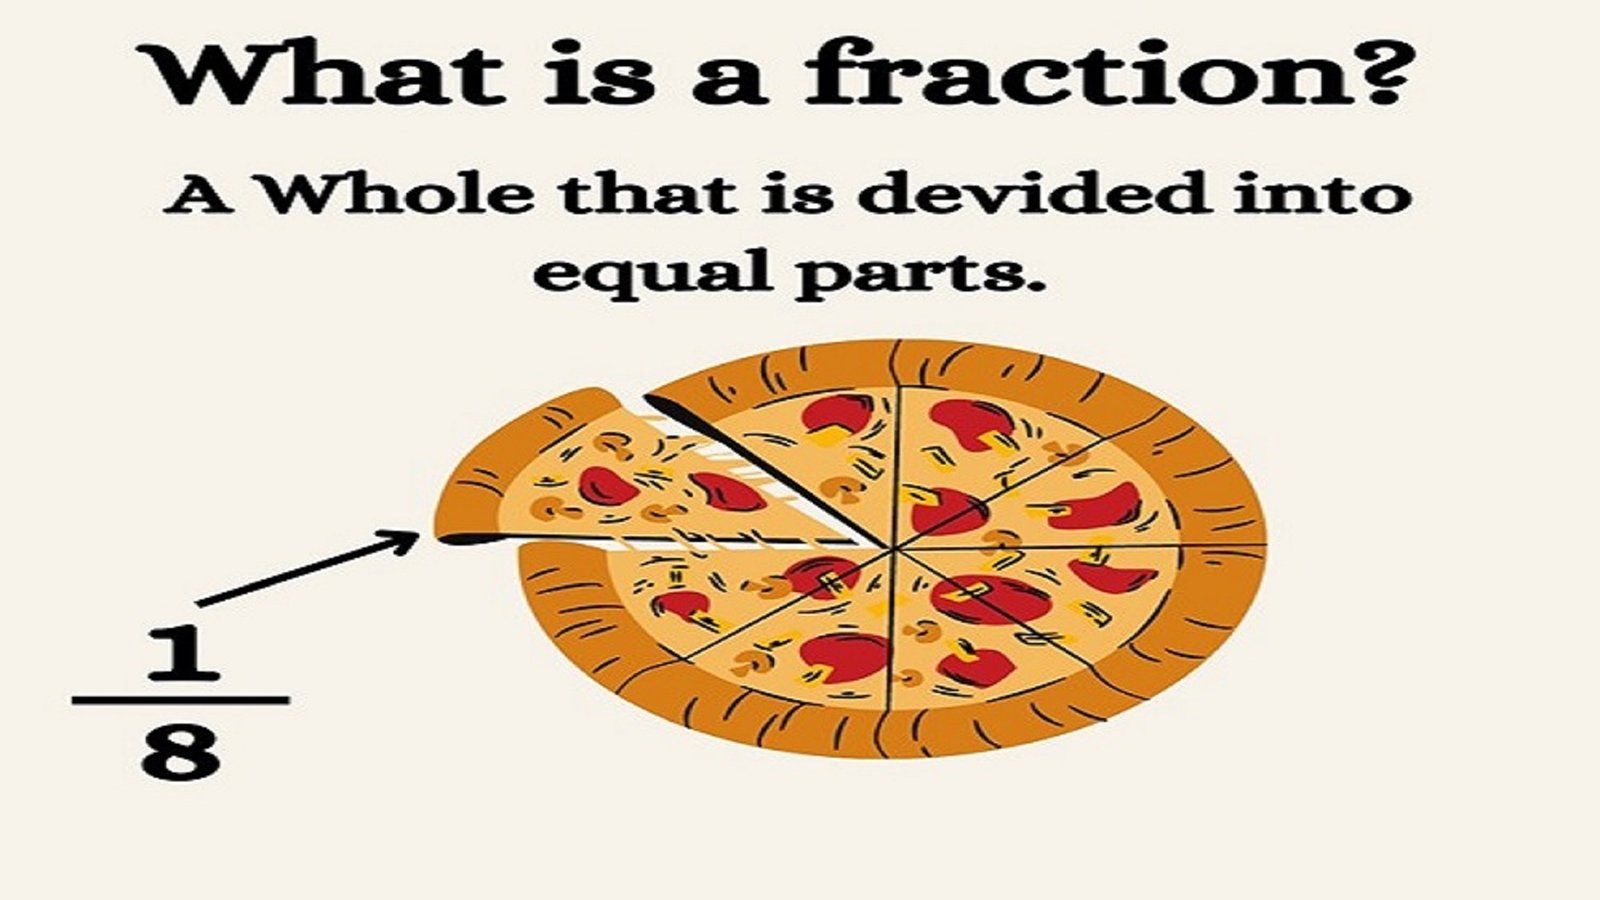 What is a Fraction? image